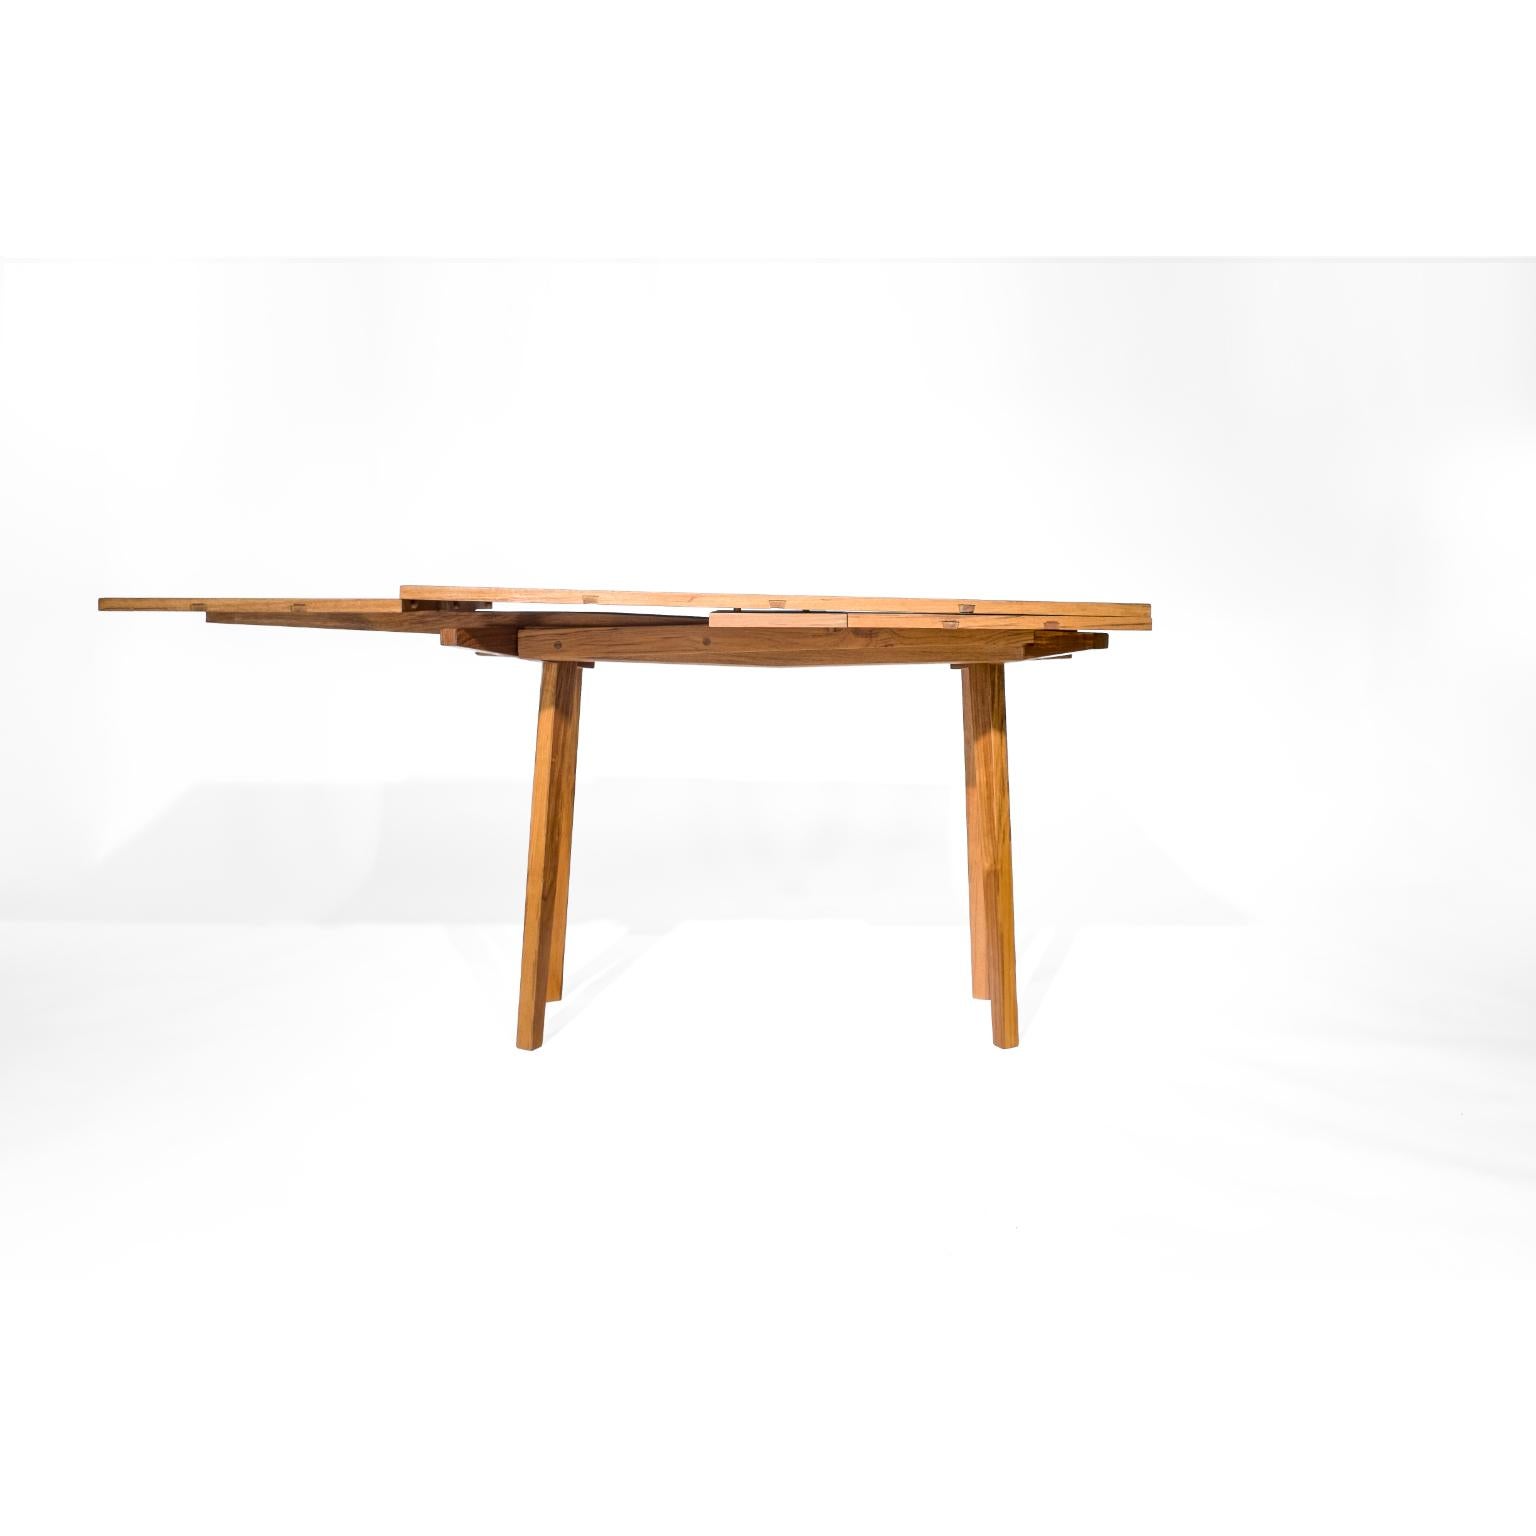 Hand-Crafted Dutch Pull Out Table in Hardwood with Japanese Joinery and Danish Aesthetics For Sale